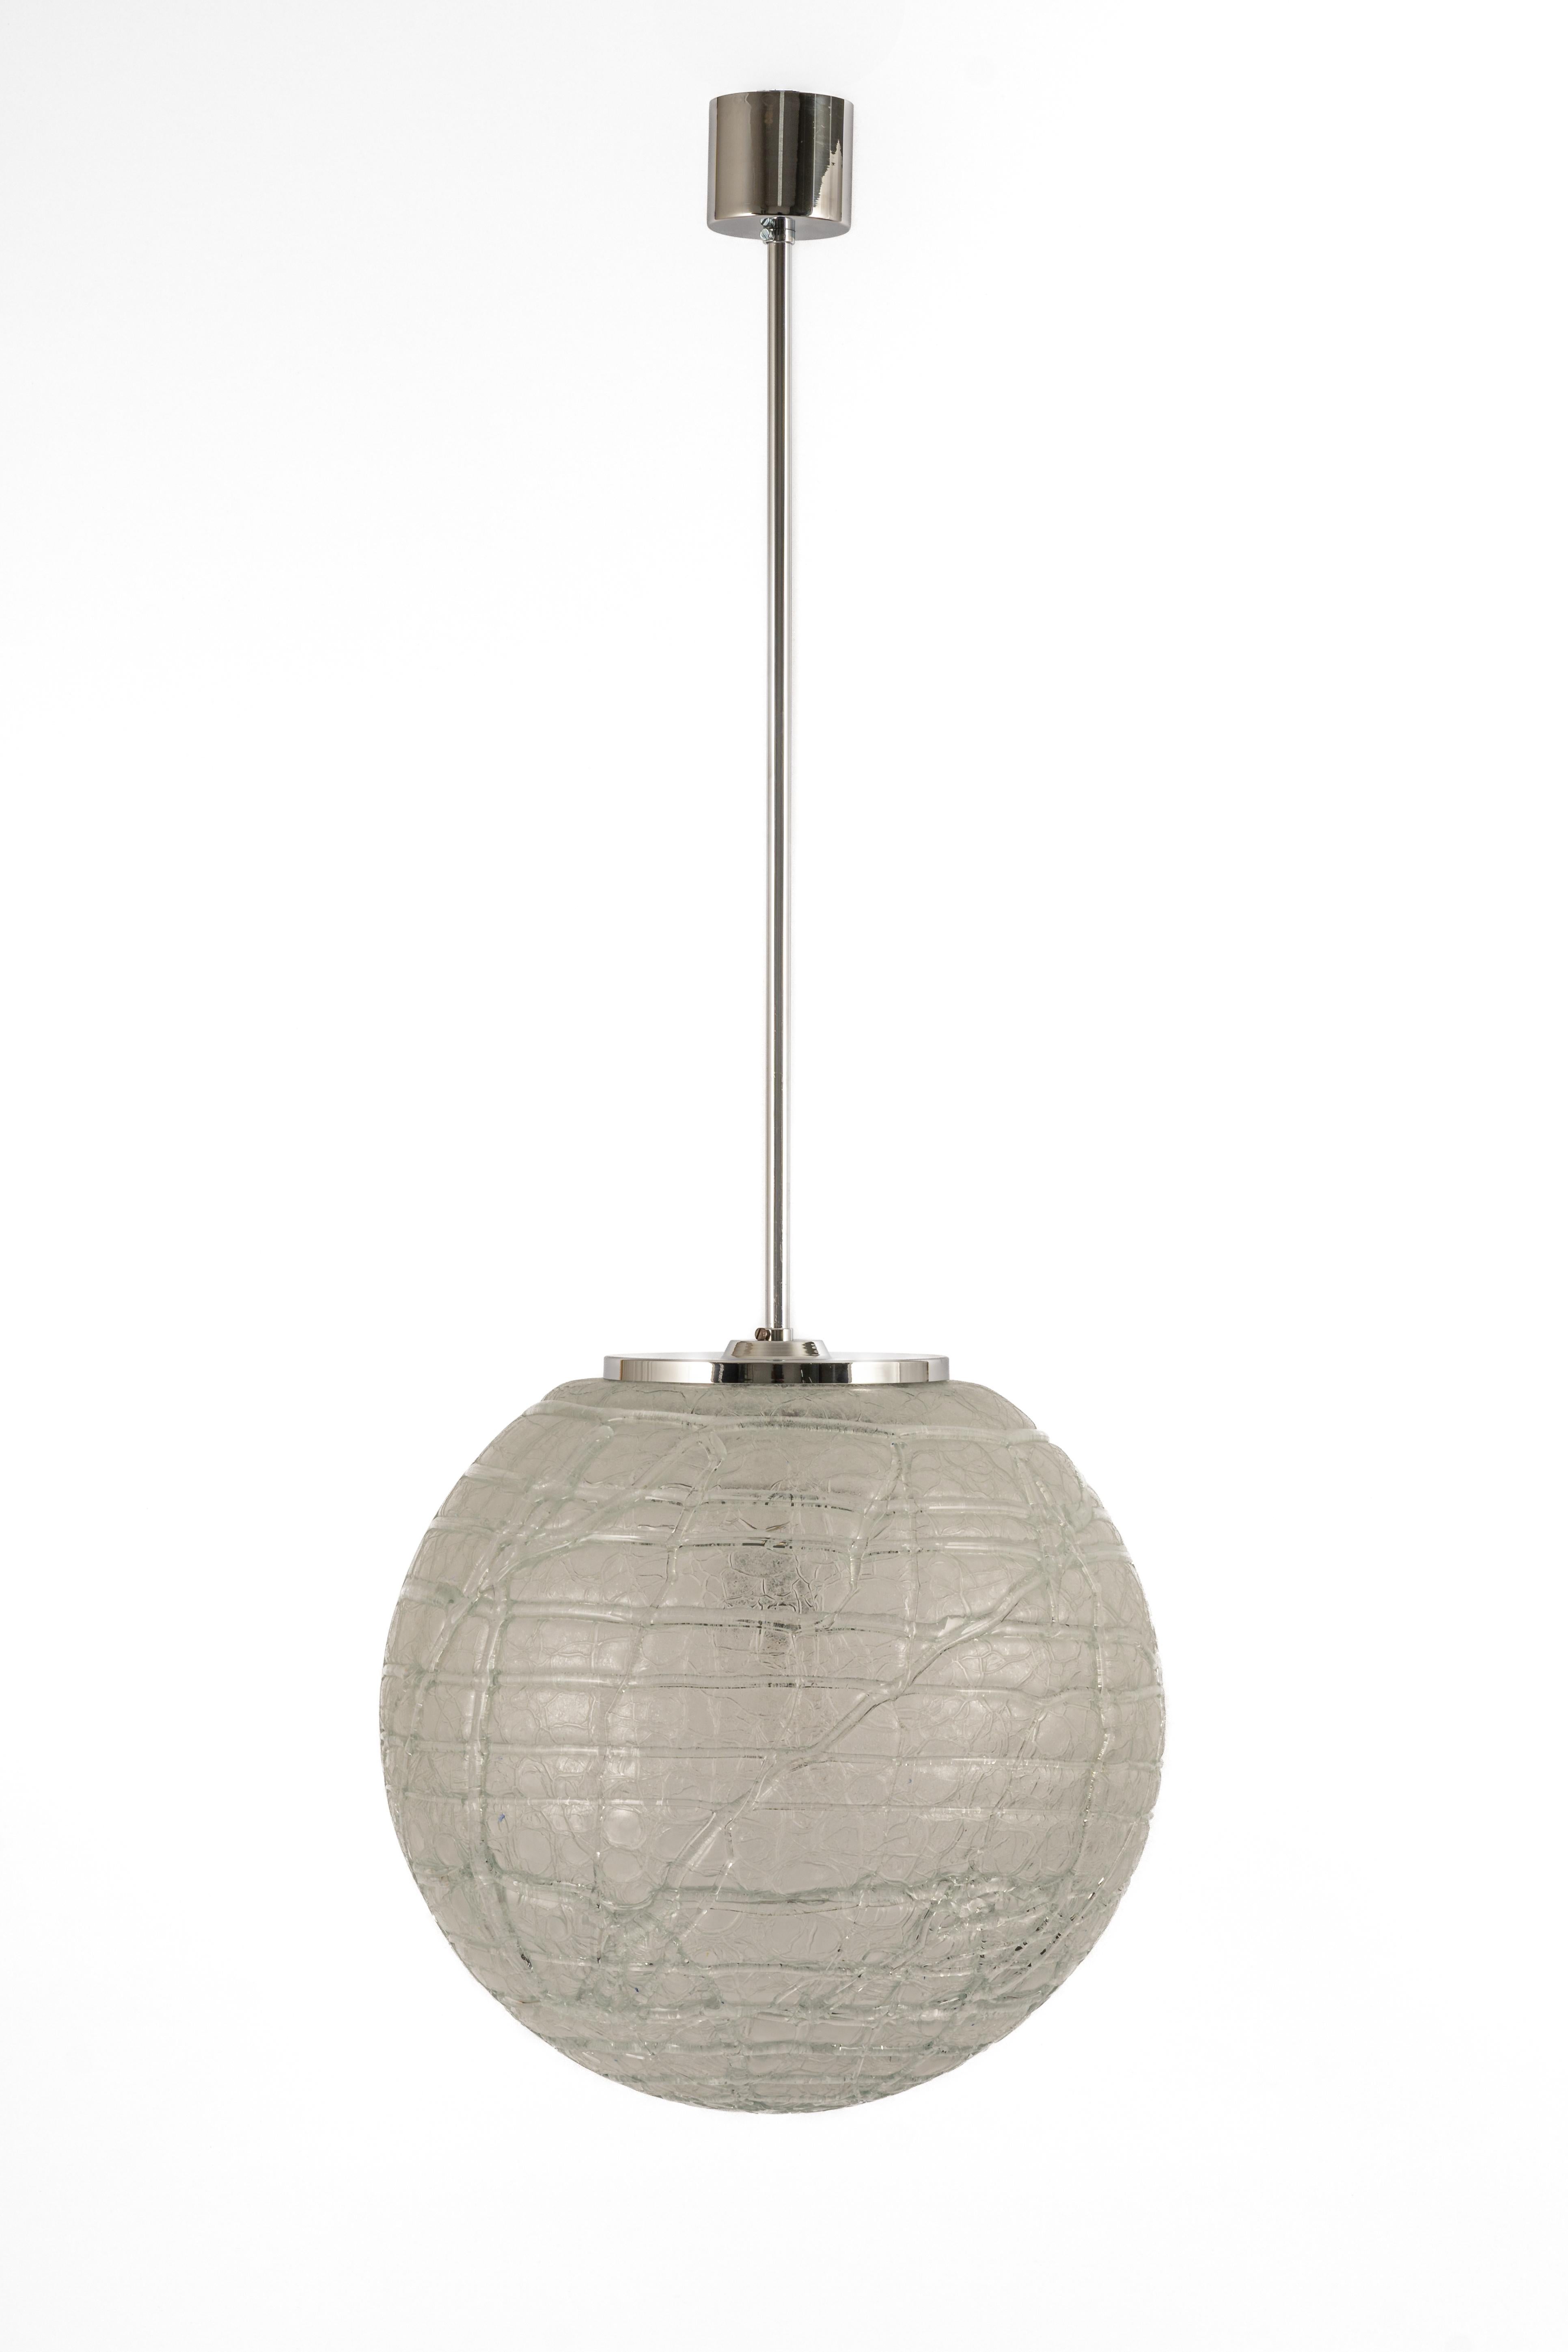 Doria Pendant light with large volcanic Murano glass ball.
High-quality materials, give a wonderful light effect when it is on.

Sockets: One E27 standard bulb. Max 100 Watts.
Light bulbs are not included. It is possible to install this fixture